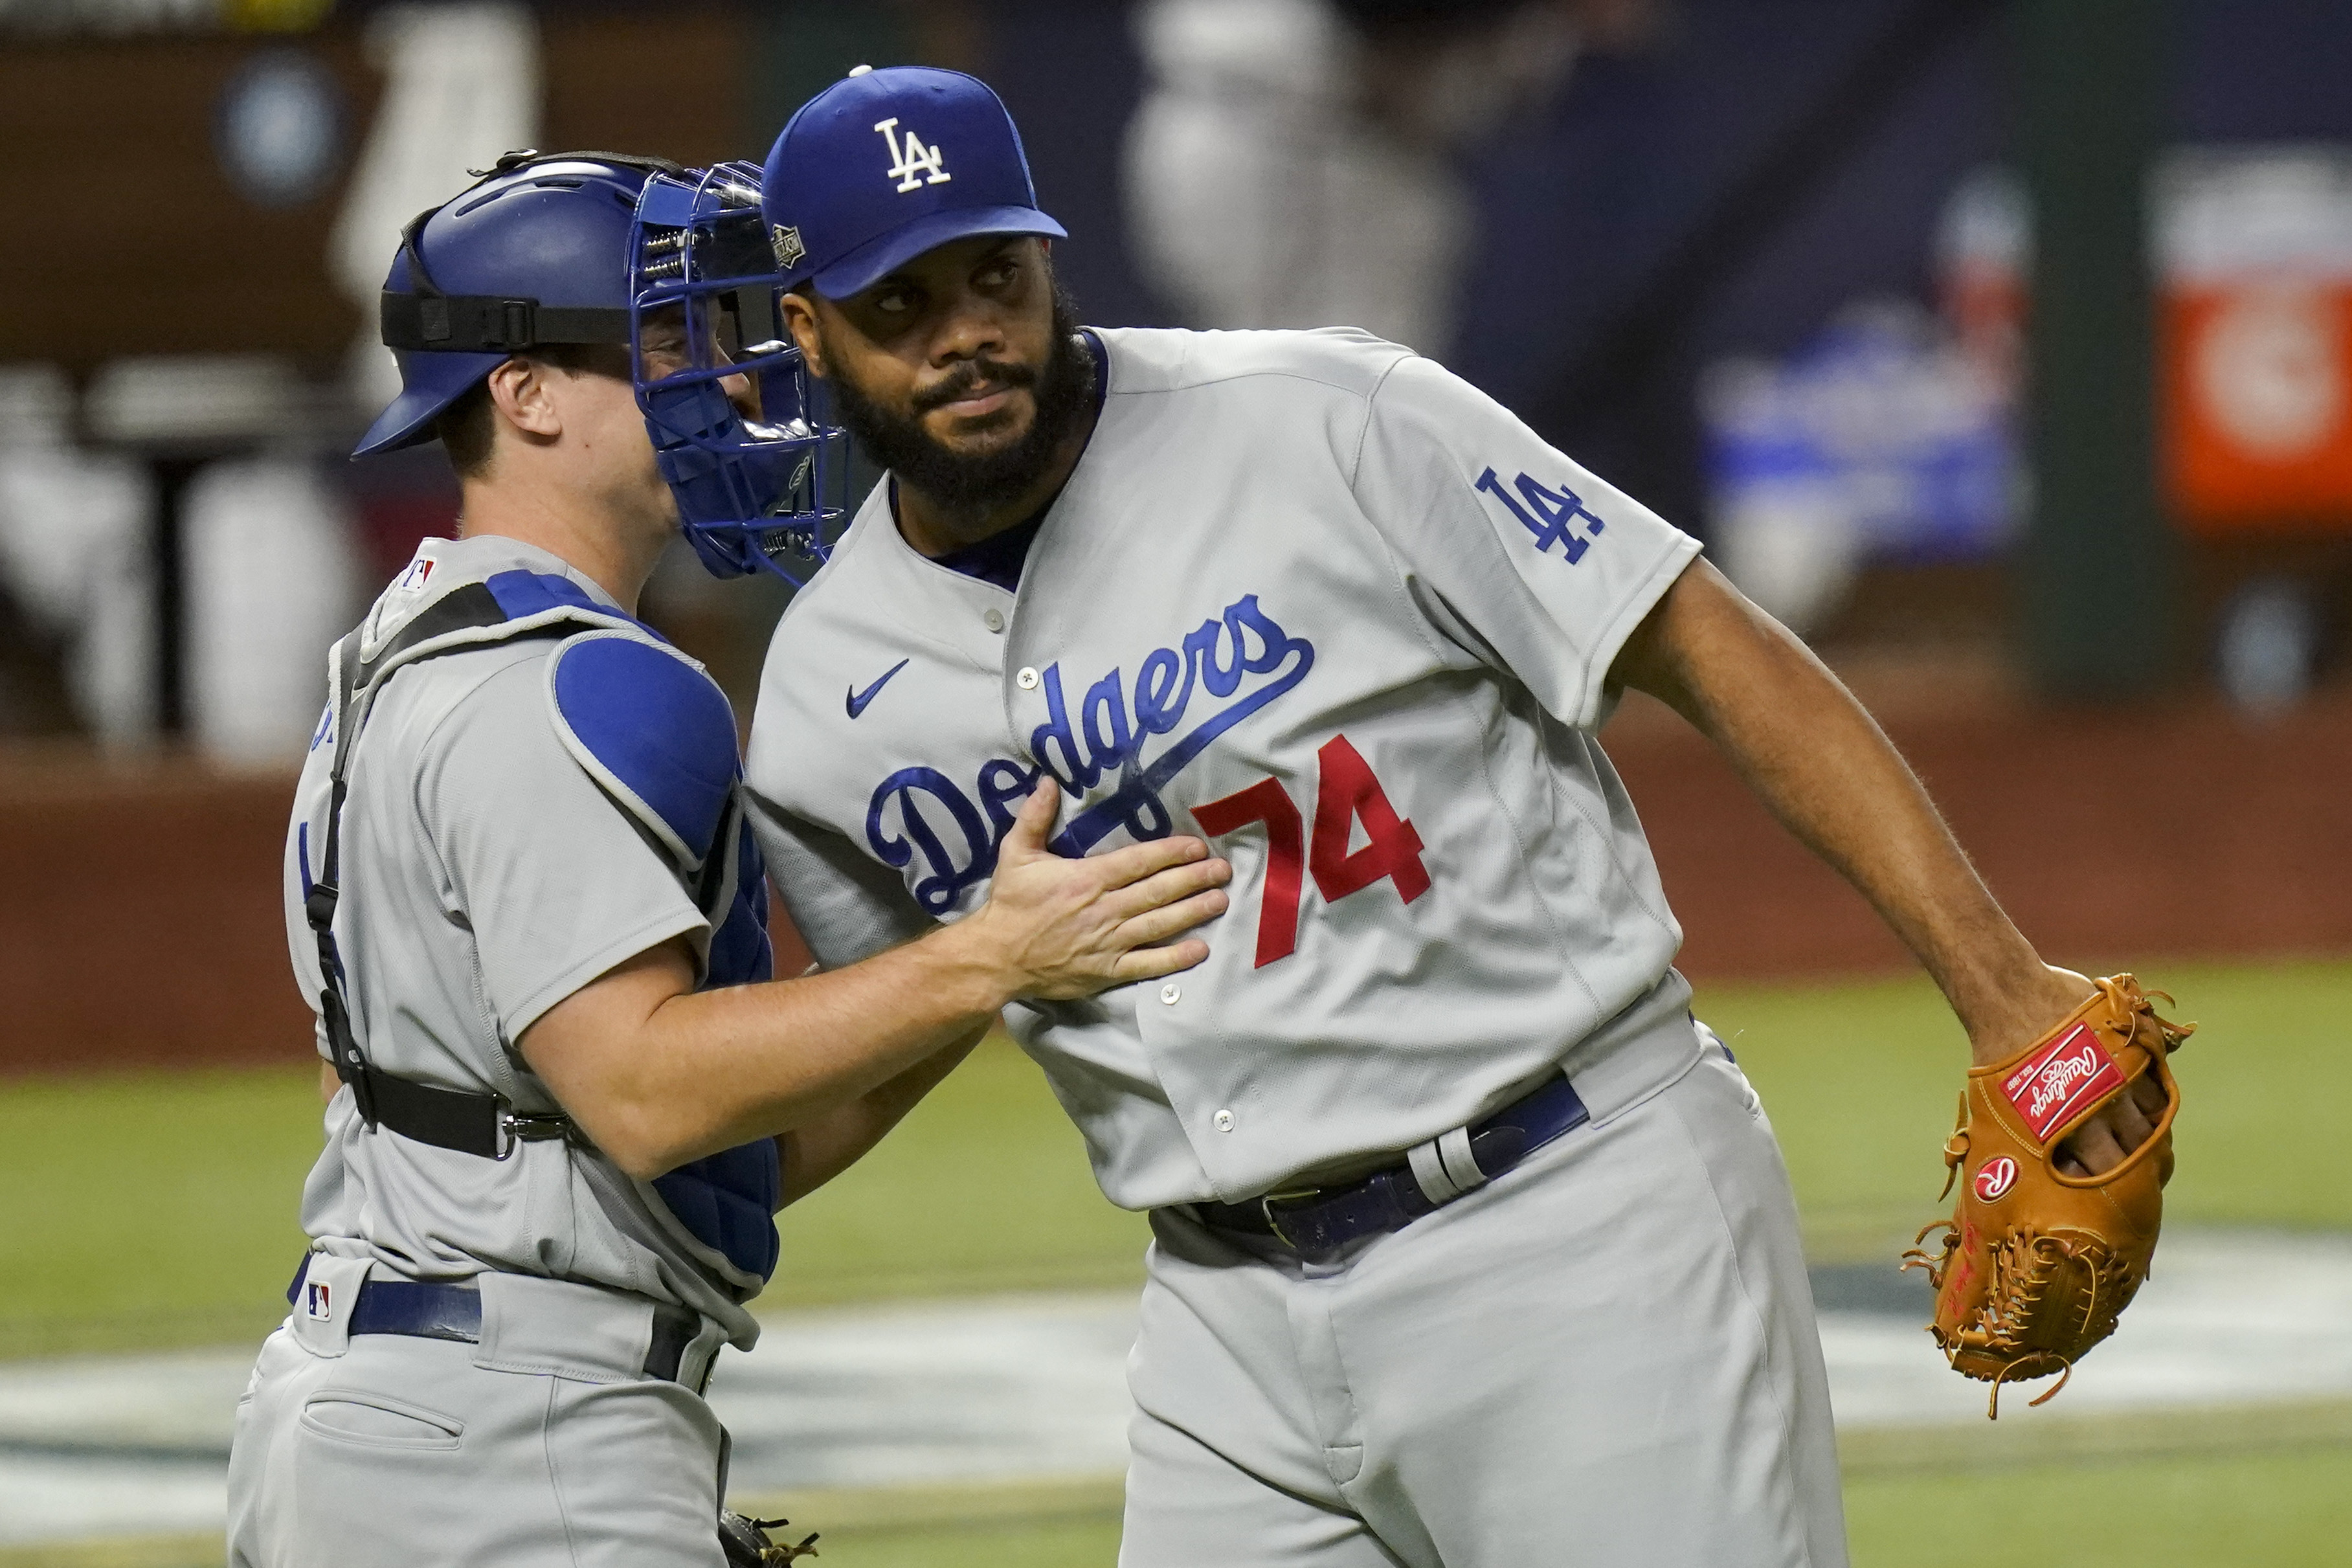 Dodgers win 7-3 over Braves in Game 5, saving team from NLCS elimination